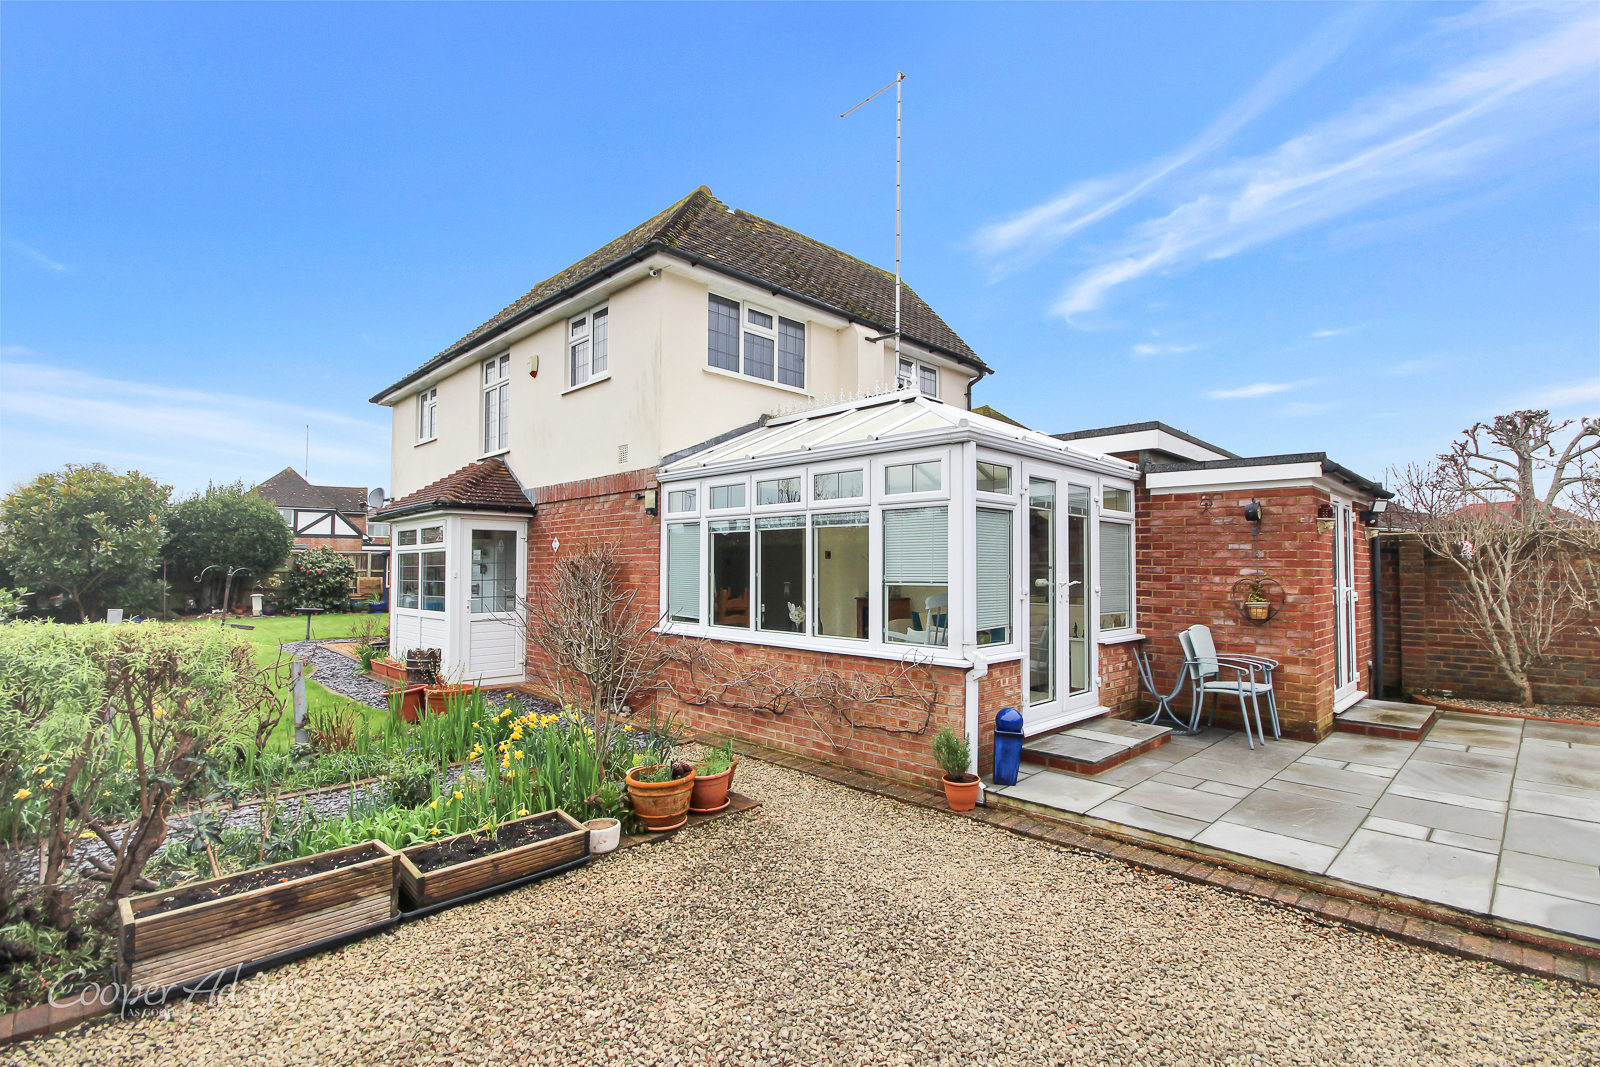 4 bed house for sale in Holmes Lane, Rustington  - Property Image 1